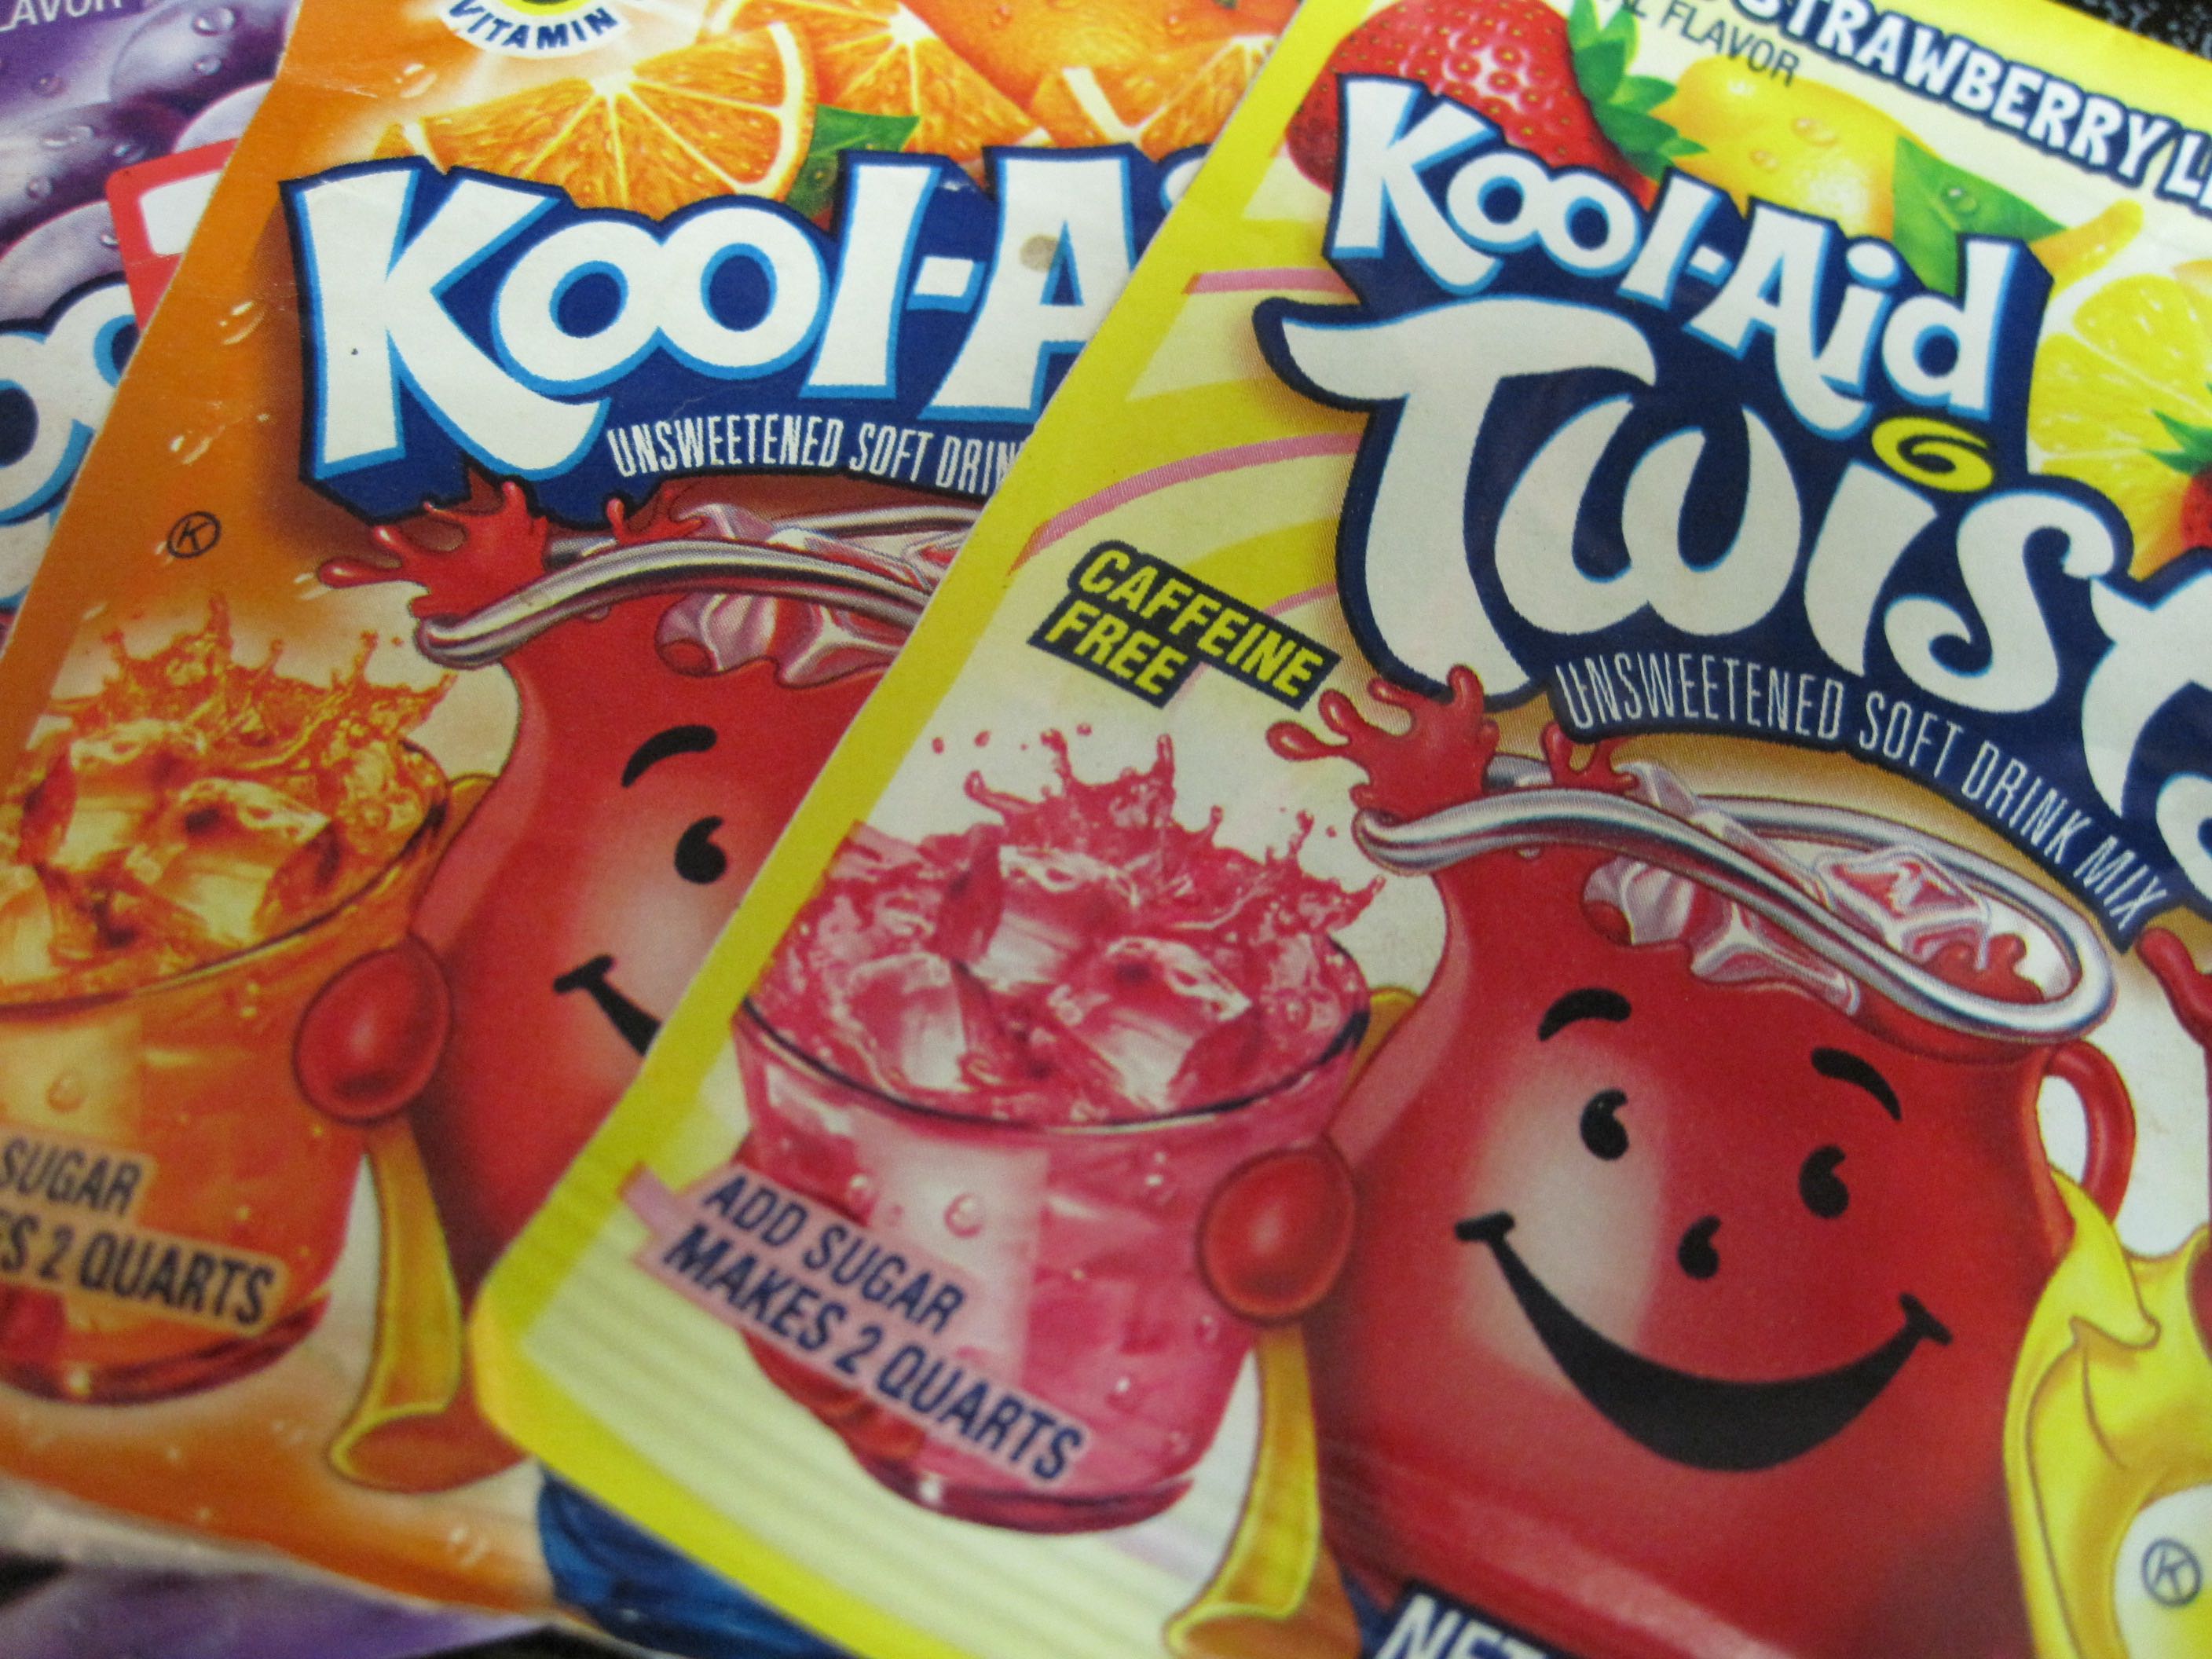 Do you dilute Kool-Aid? Photo: Patricia Vollmer